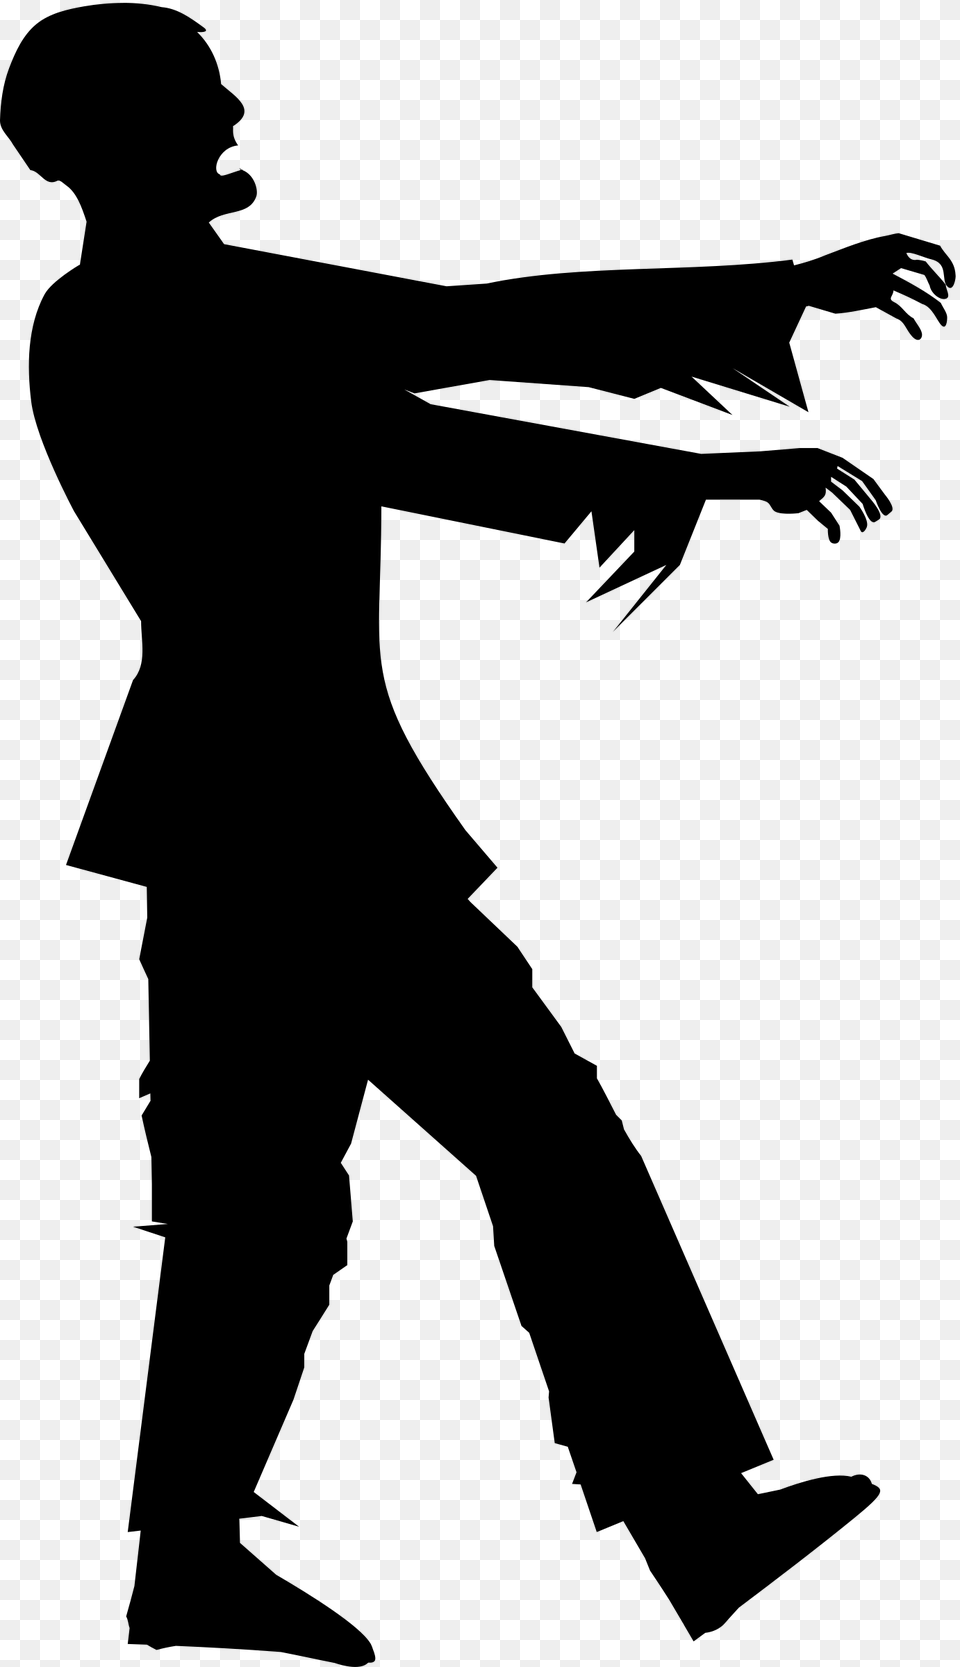 Zombie Silhouette Clip Arts Black And White Zombie, Gray Free Transparent Png